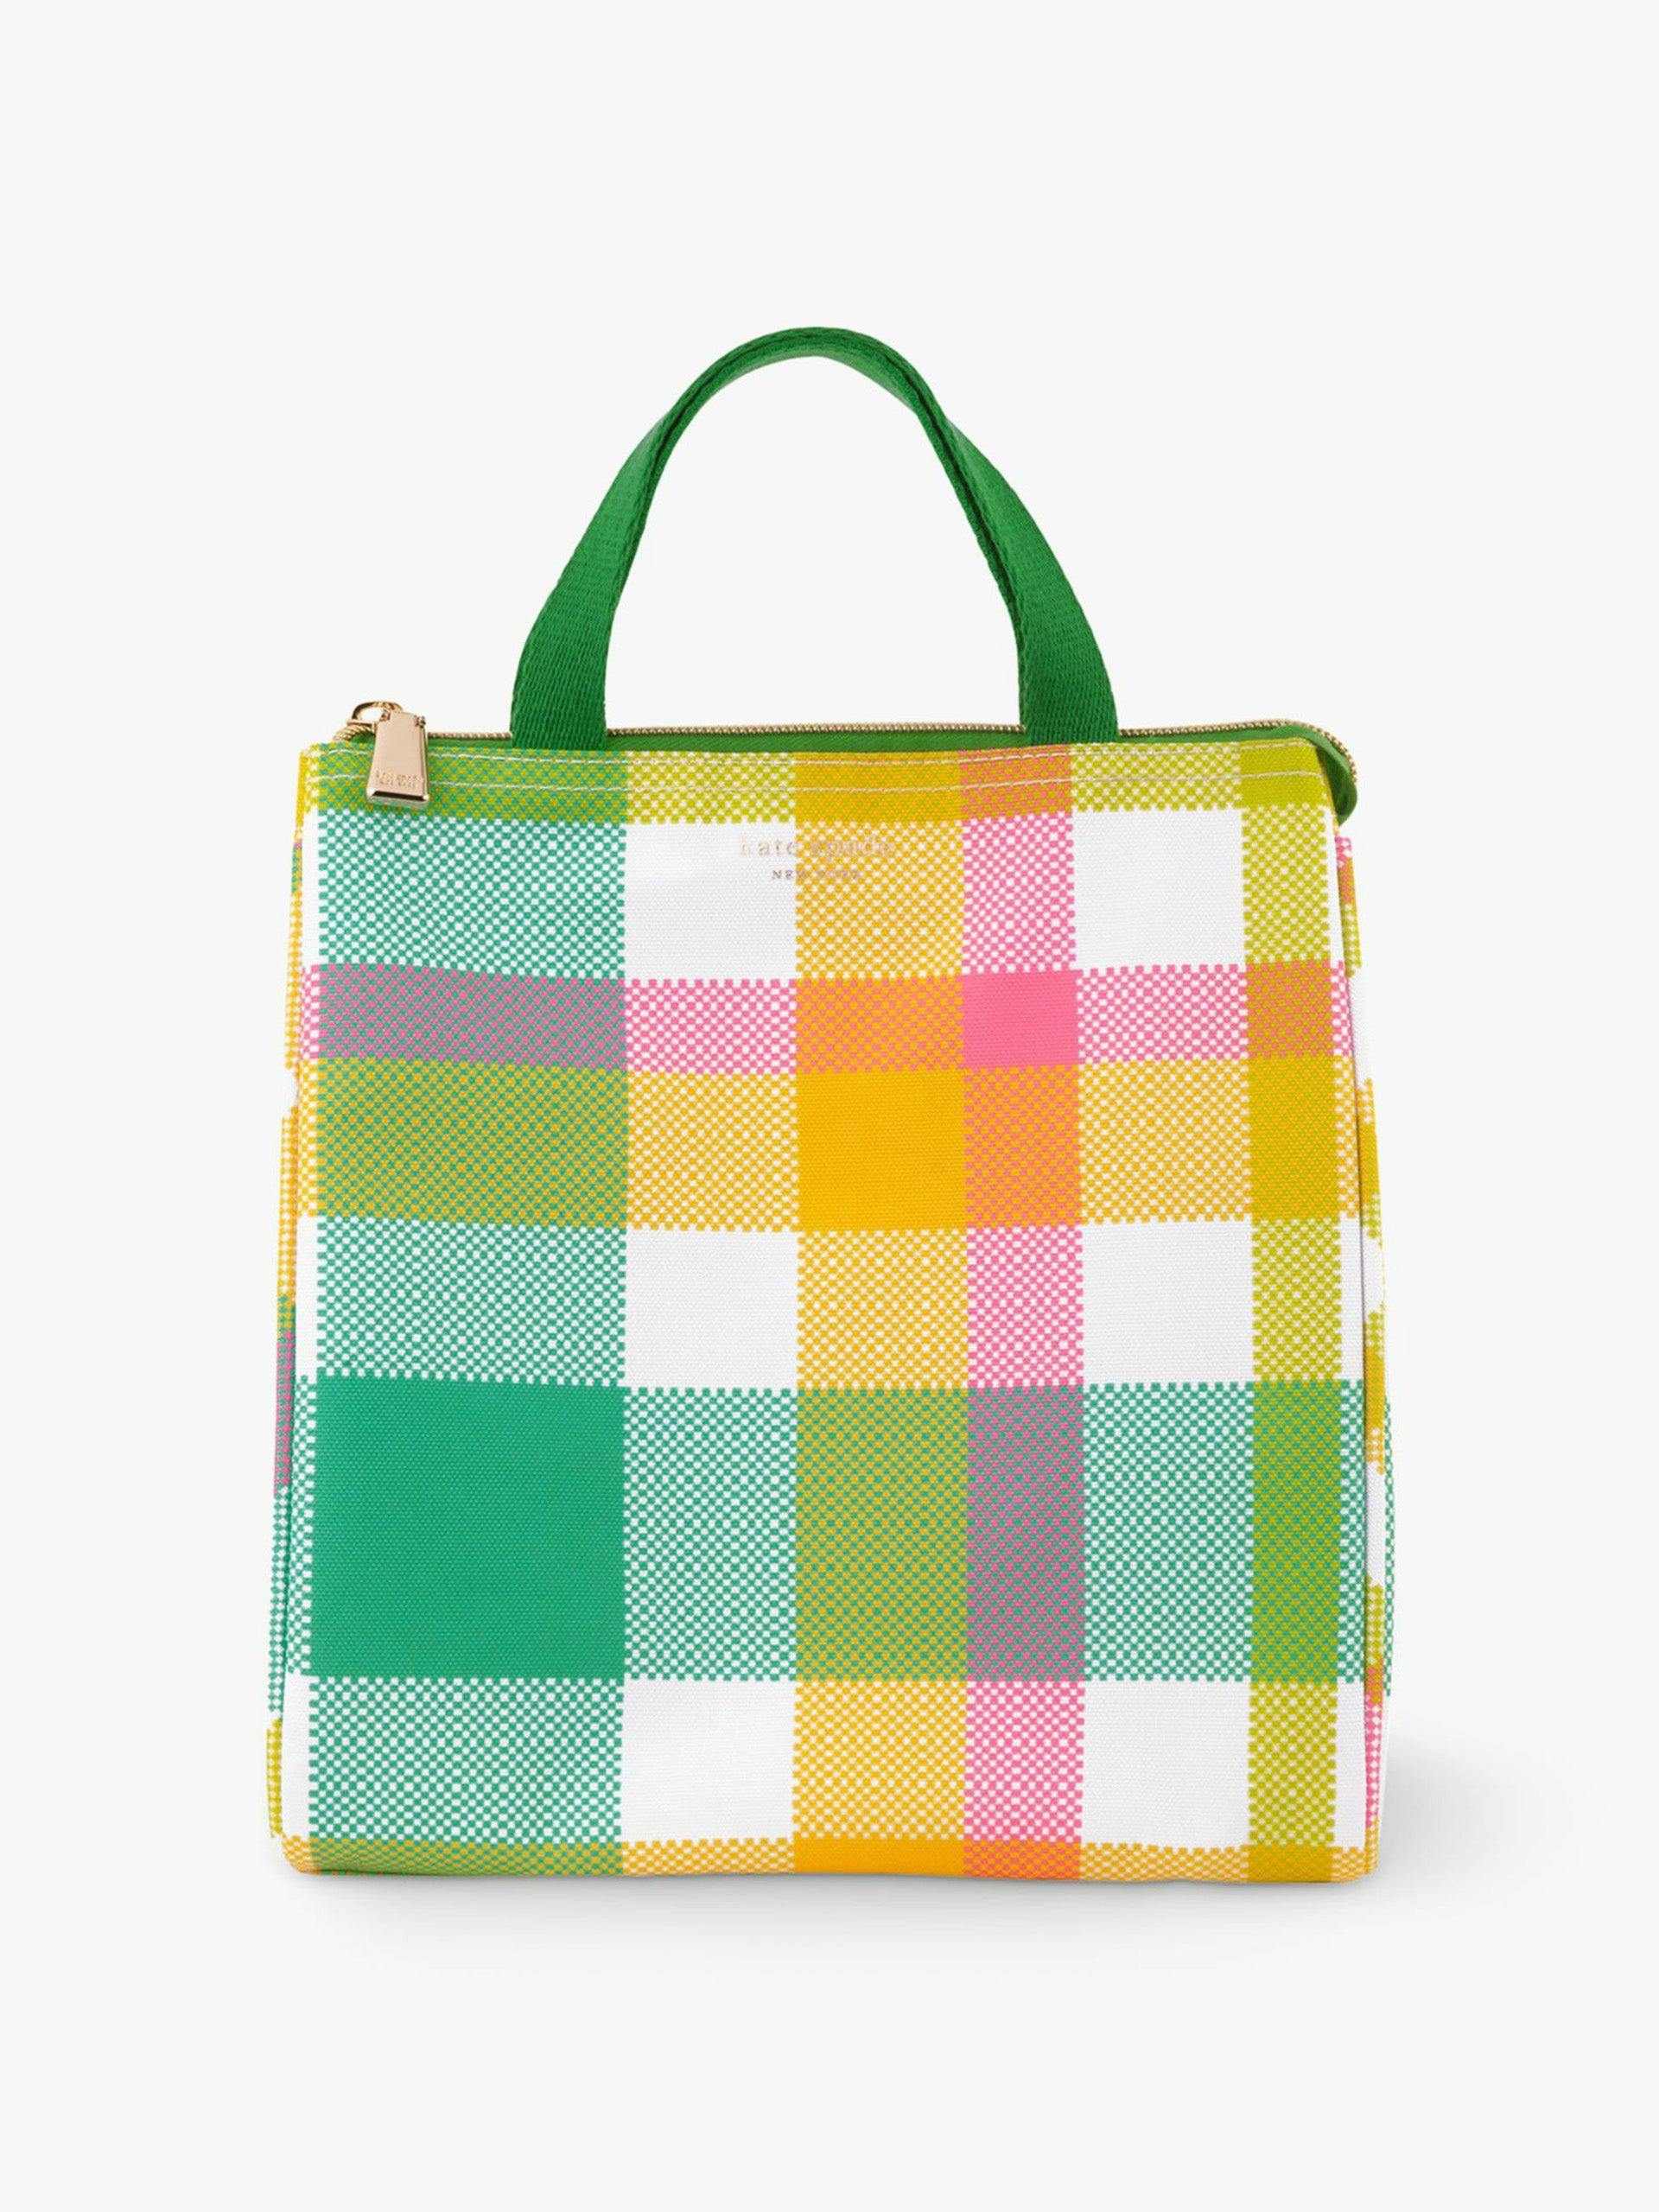 Lunch bag in Spring Plaid